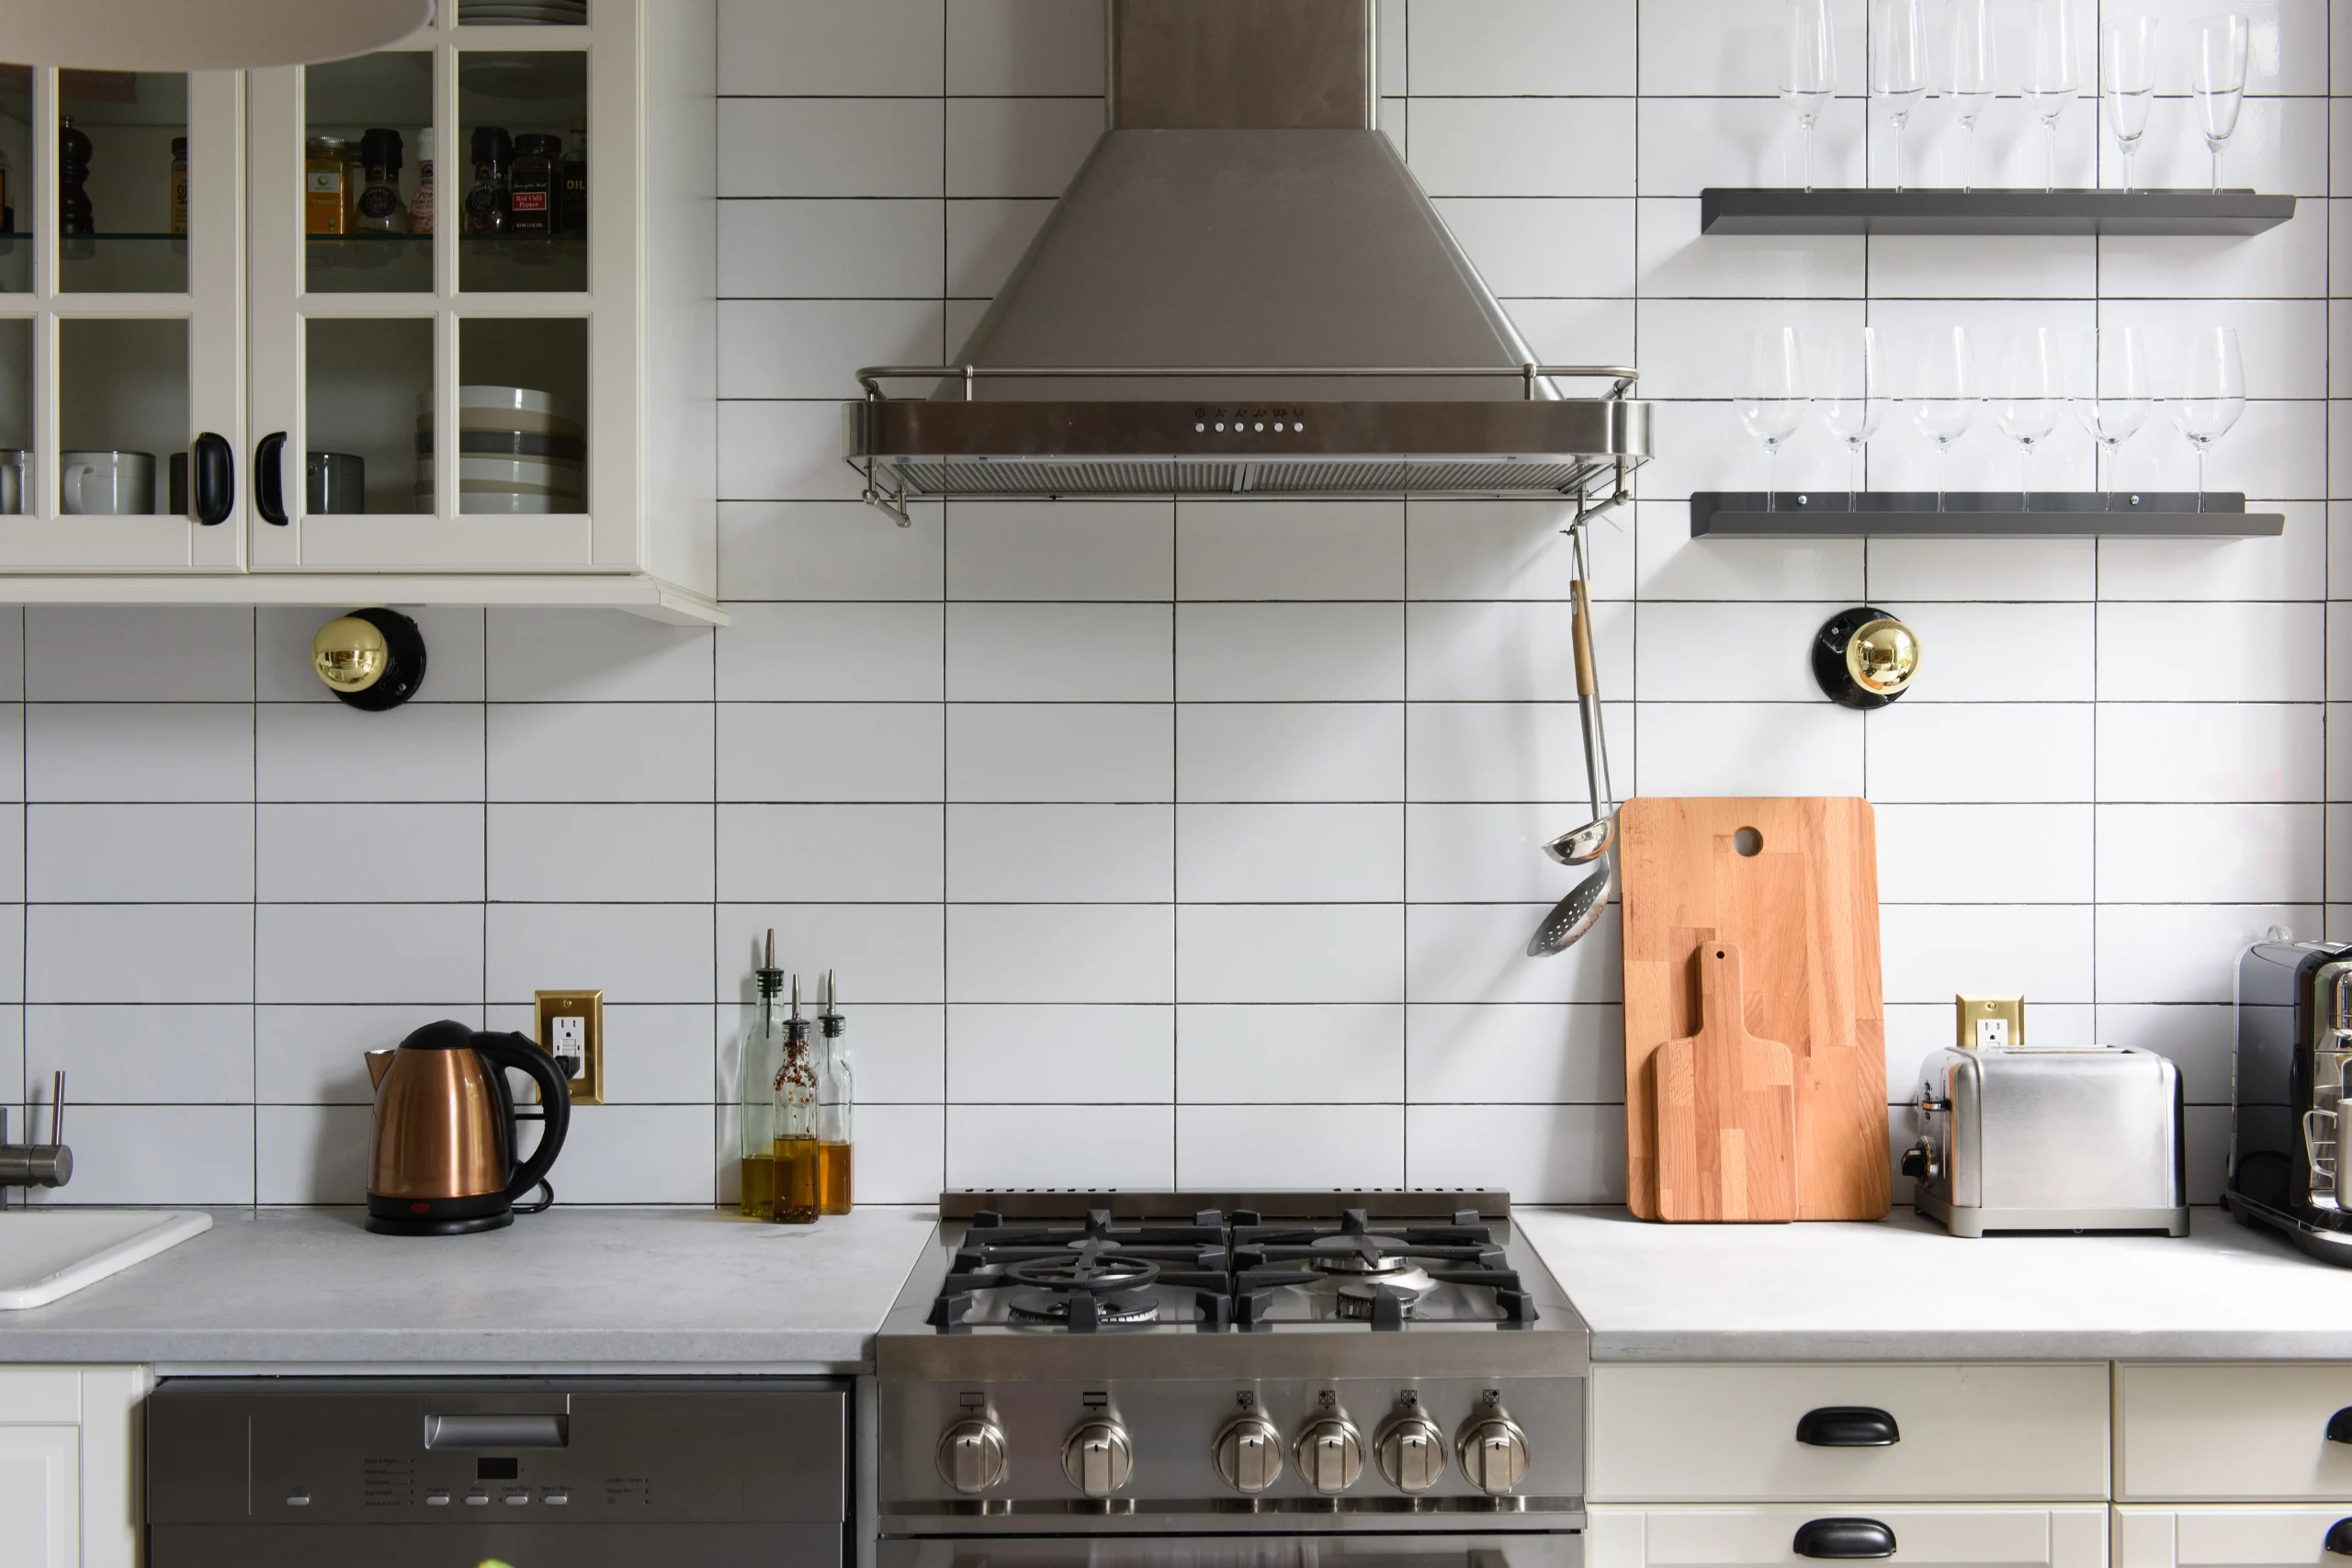 List of 6 Construction Mistakes in Restaurant Kitchens to Avoid